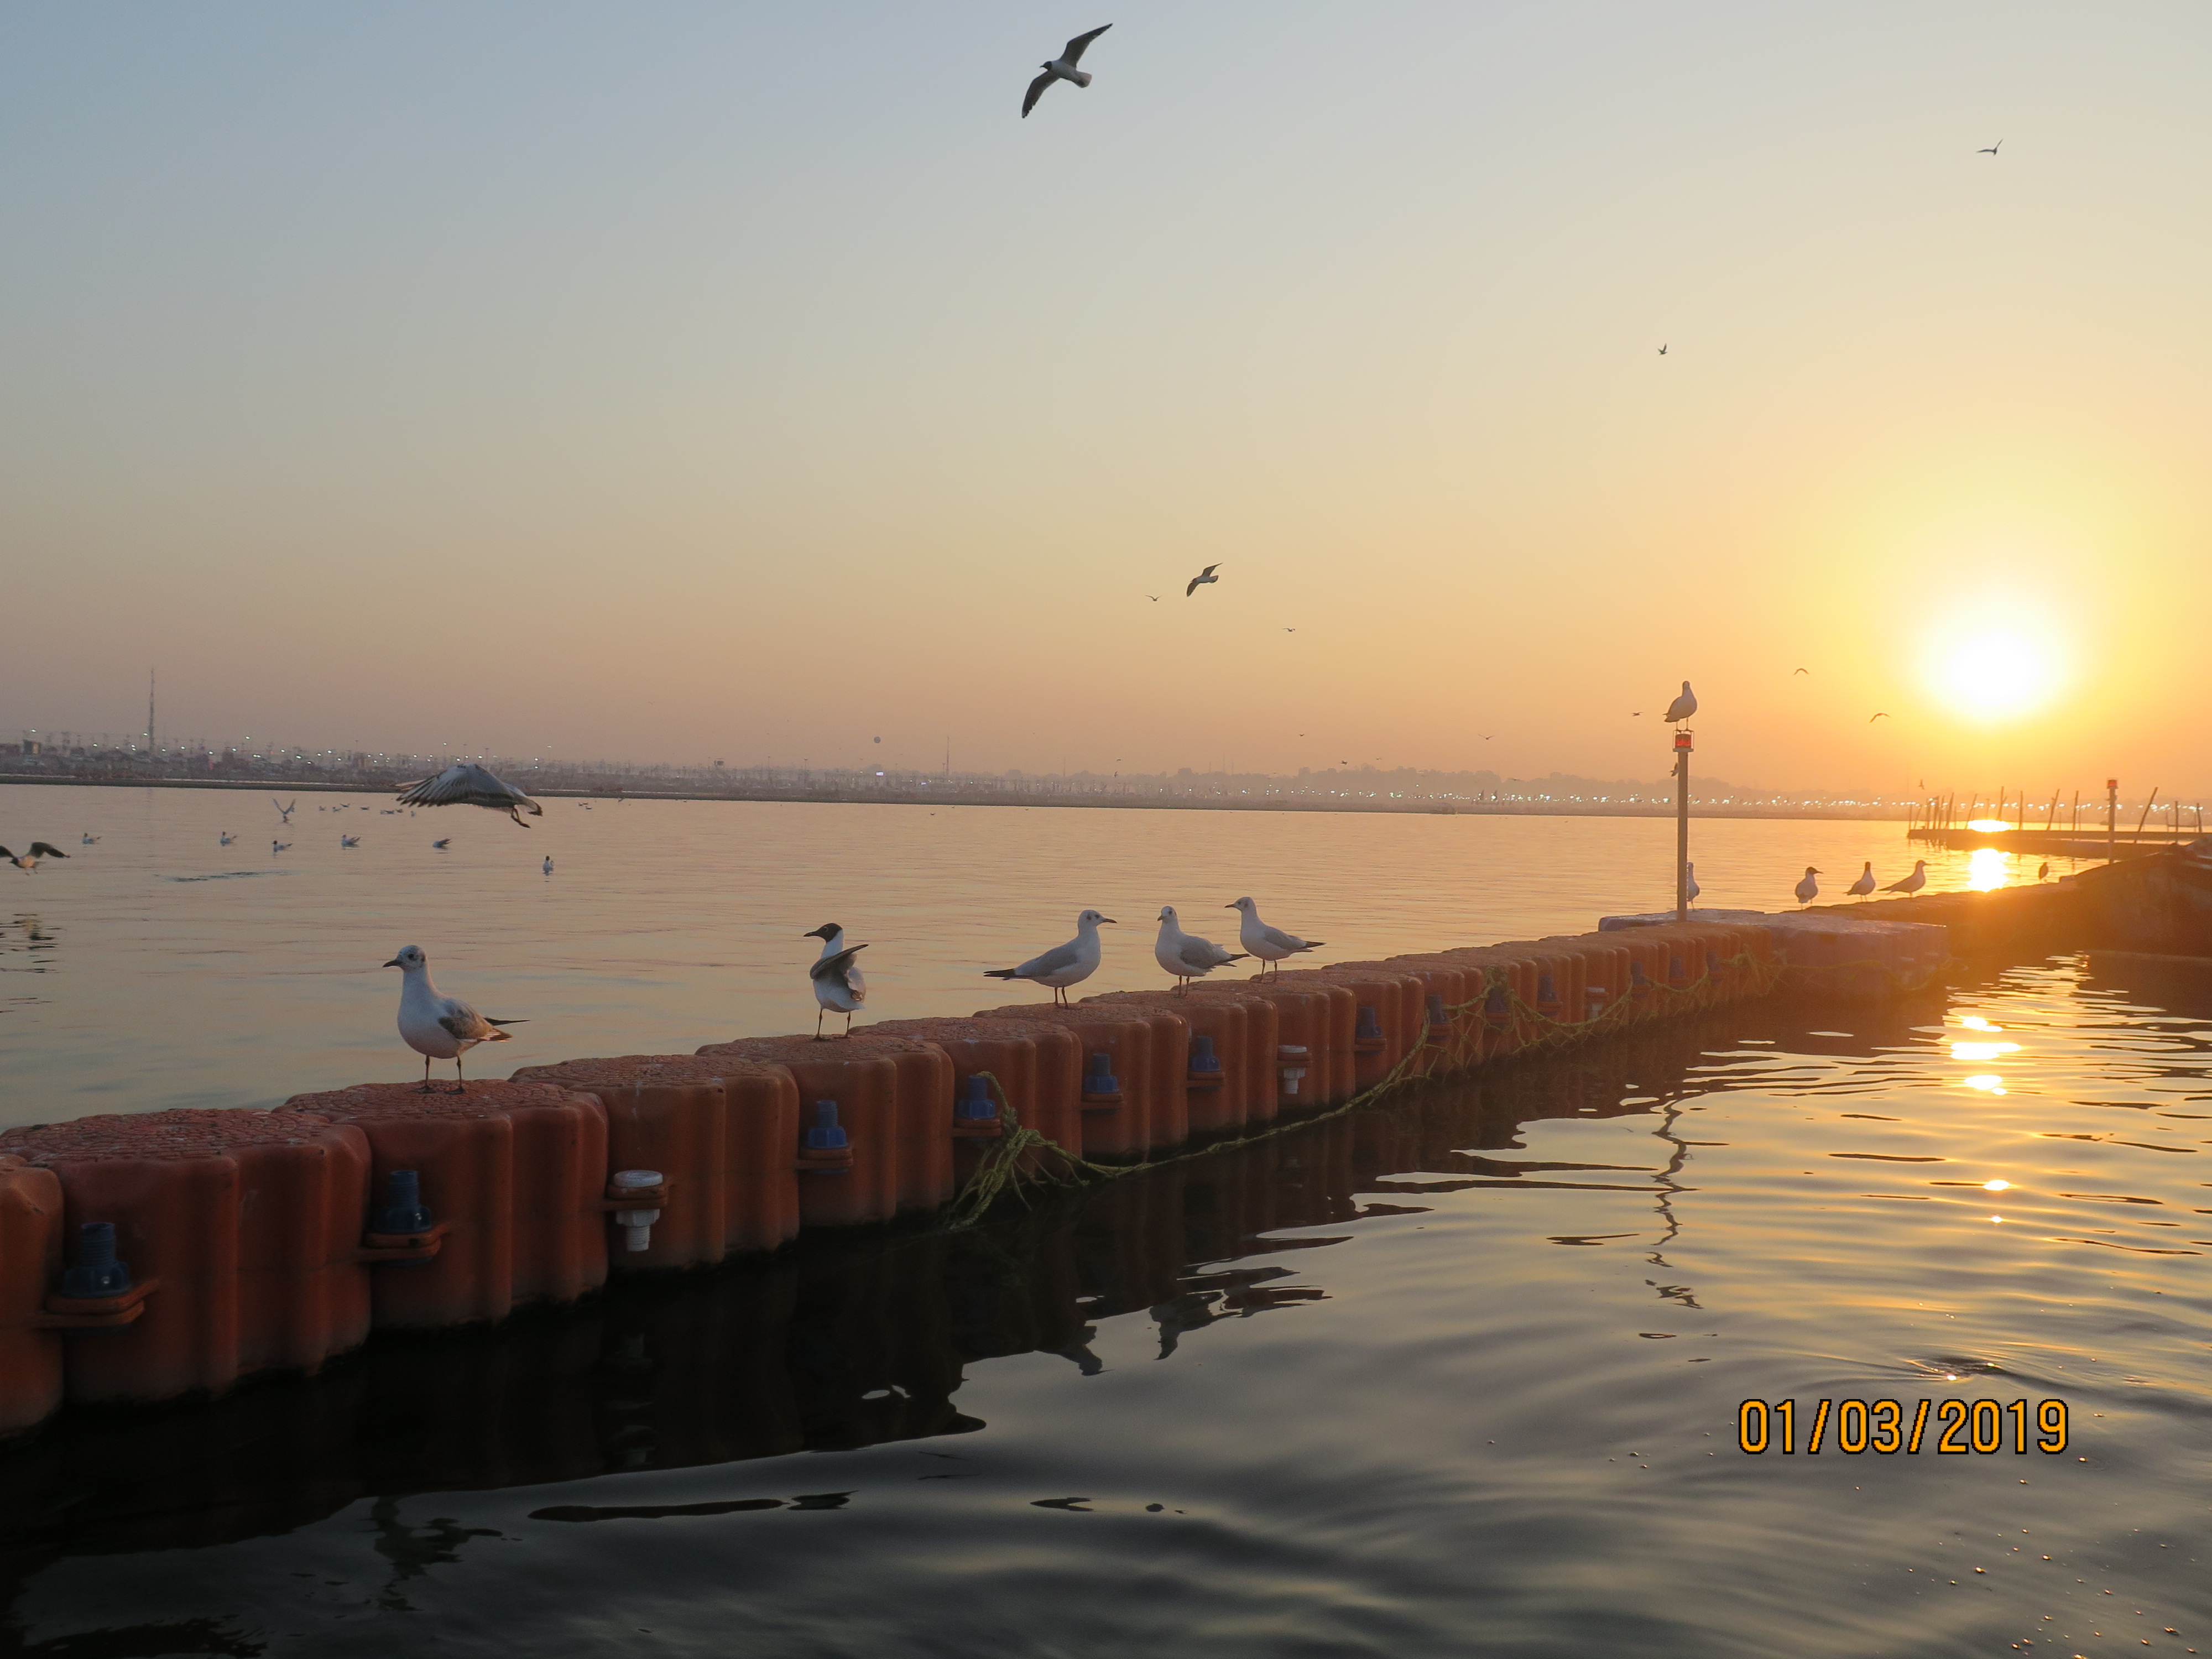 Gulls warming up on water barricades as the sun comes up lighting up the Sangam